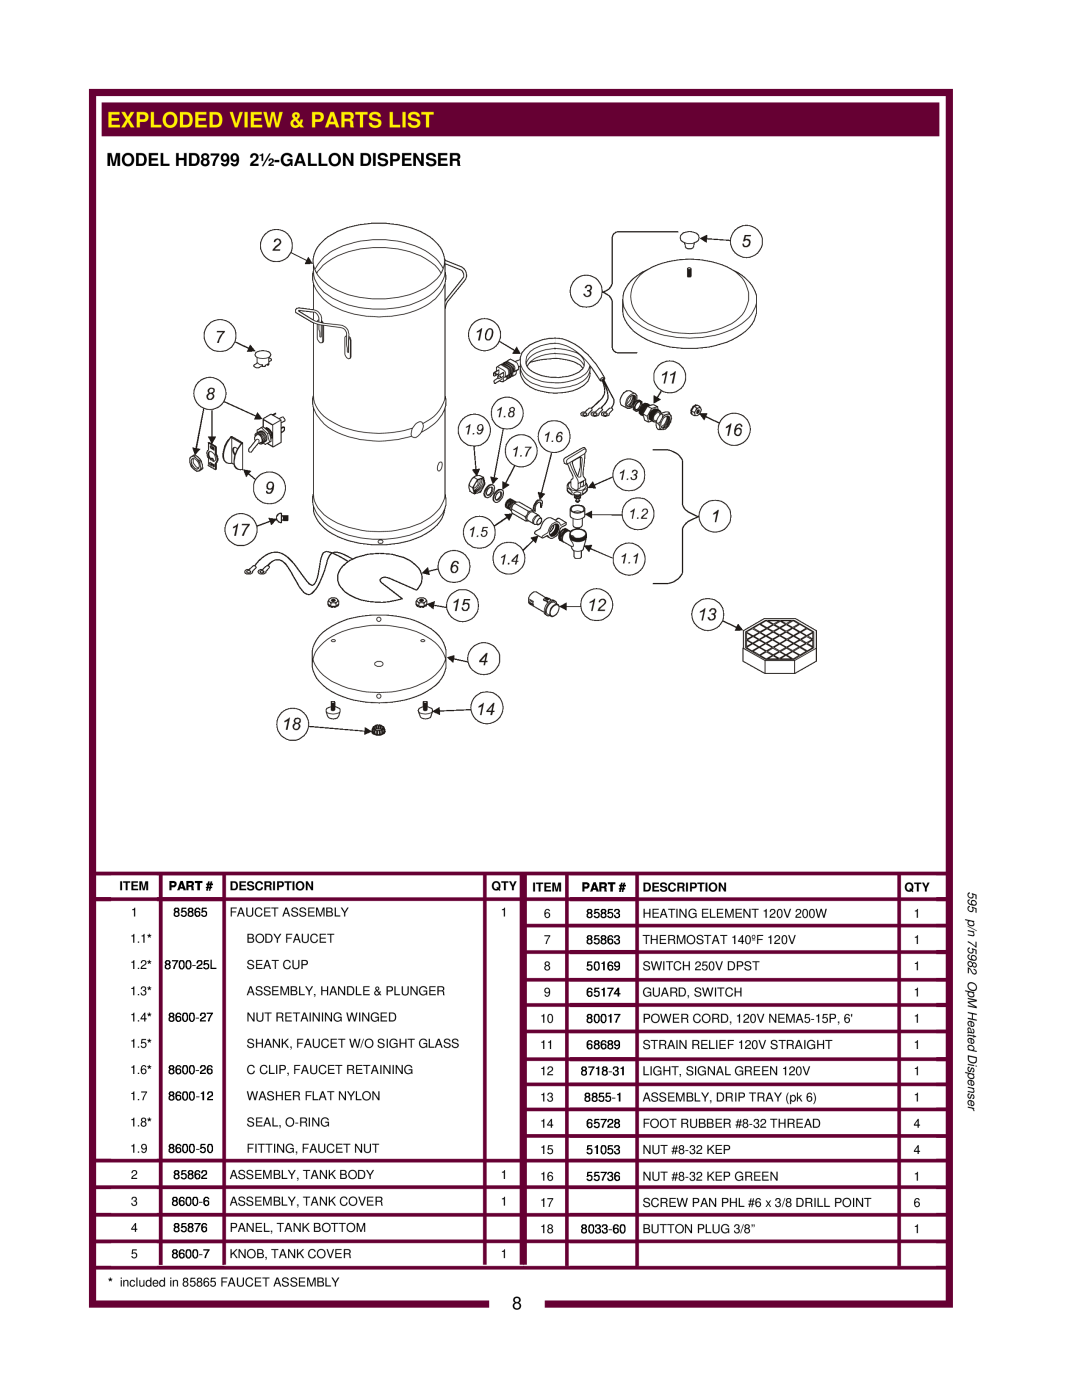 Wells HD8799, HD8802 owner manual Exploded View & Parts List, Part #, Description, 595 p/n 75982 OpM Heated Dispenser 